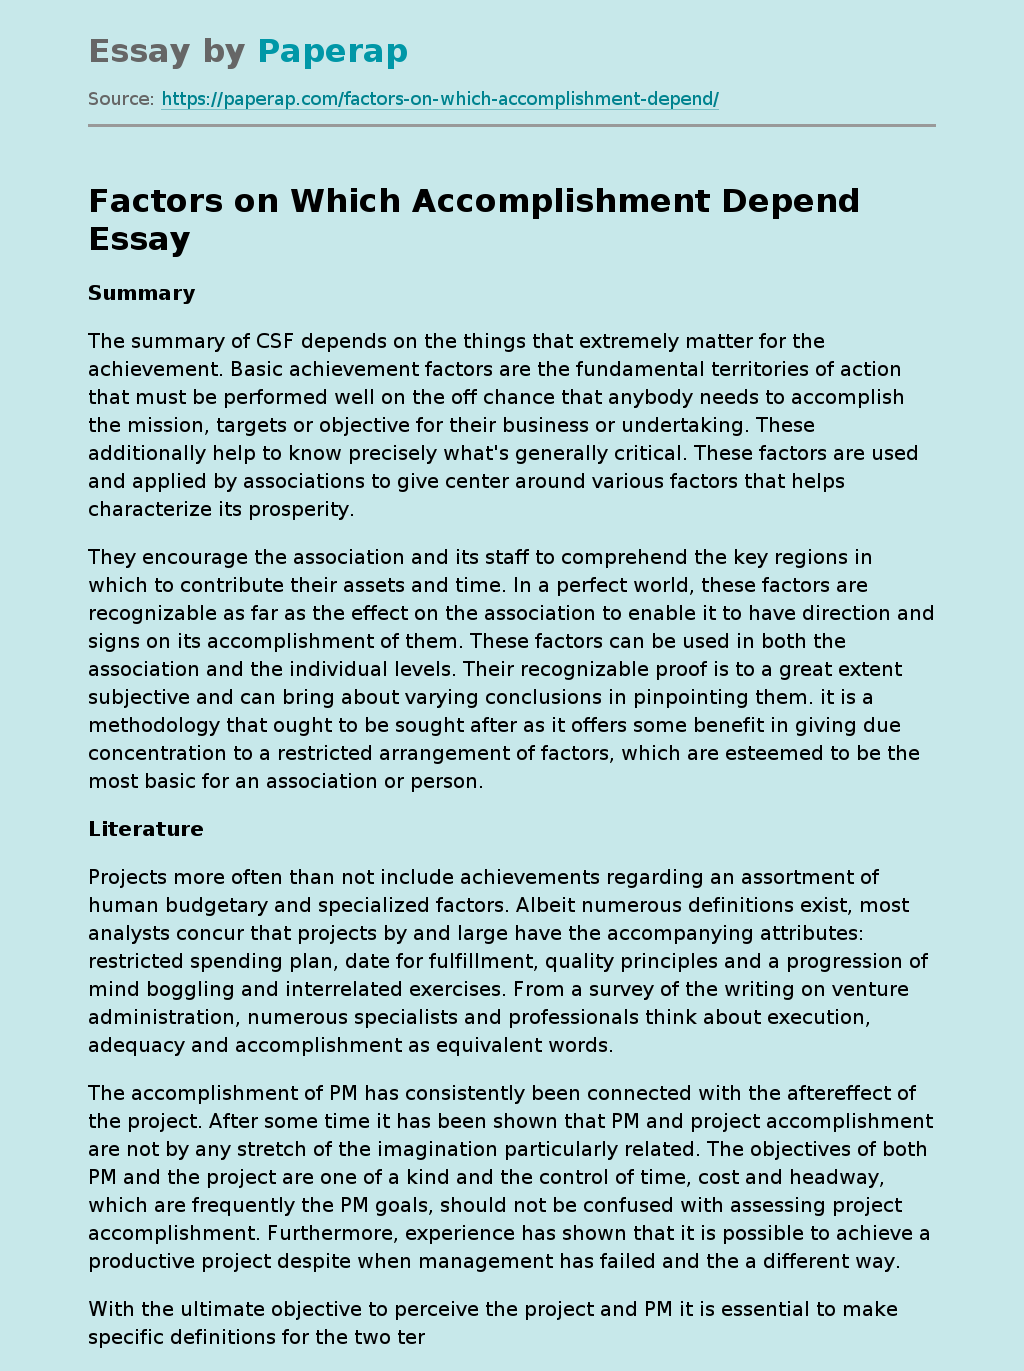 Factors on Which Accomplishment Depend